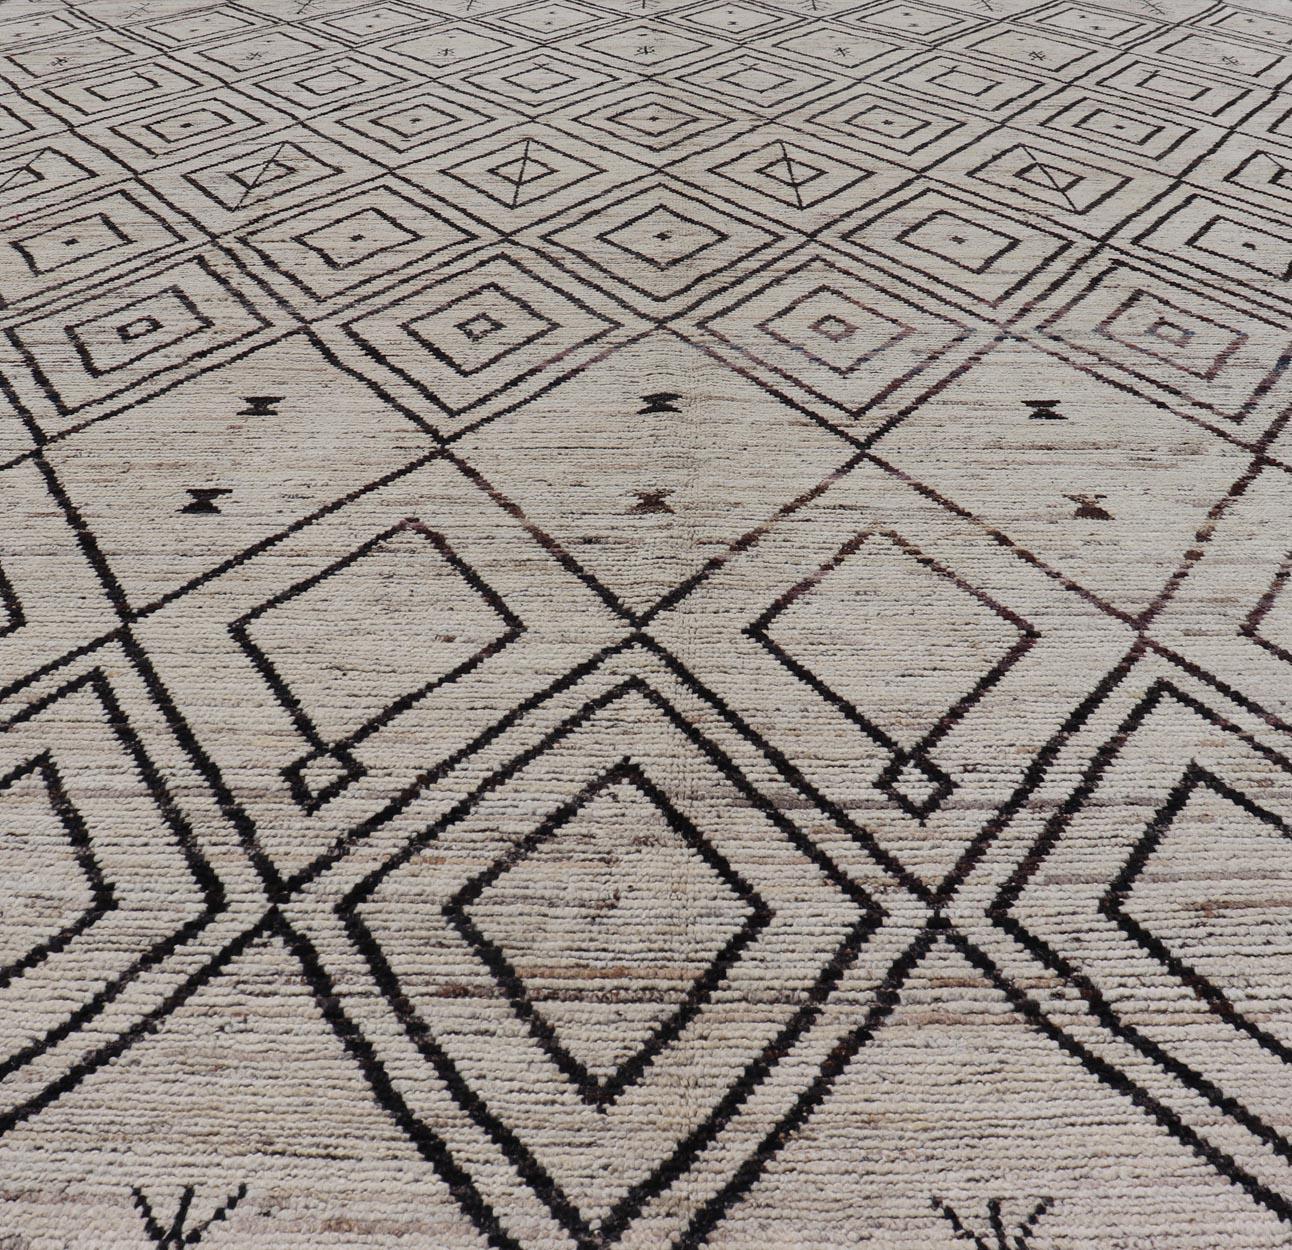 This modern casual tribal Moroccan rug has been hand-knotted. The rug features a modern all-over geometric diamond design, replete with various motifs in neutral and earthy tones; making this rug a superb fit for a variety of classic, modern, casual